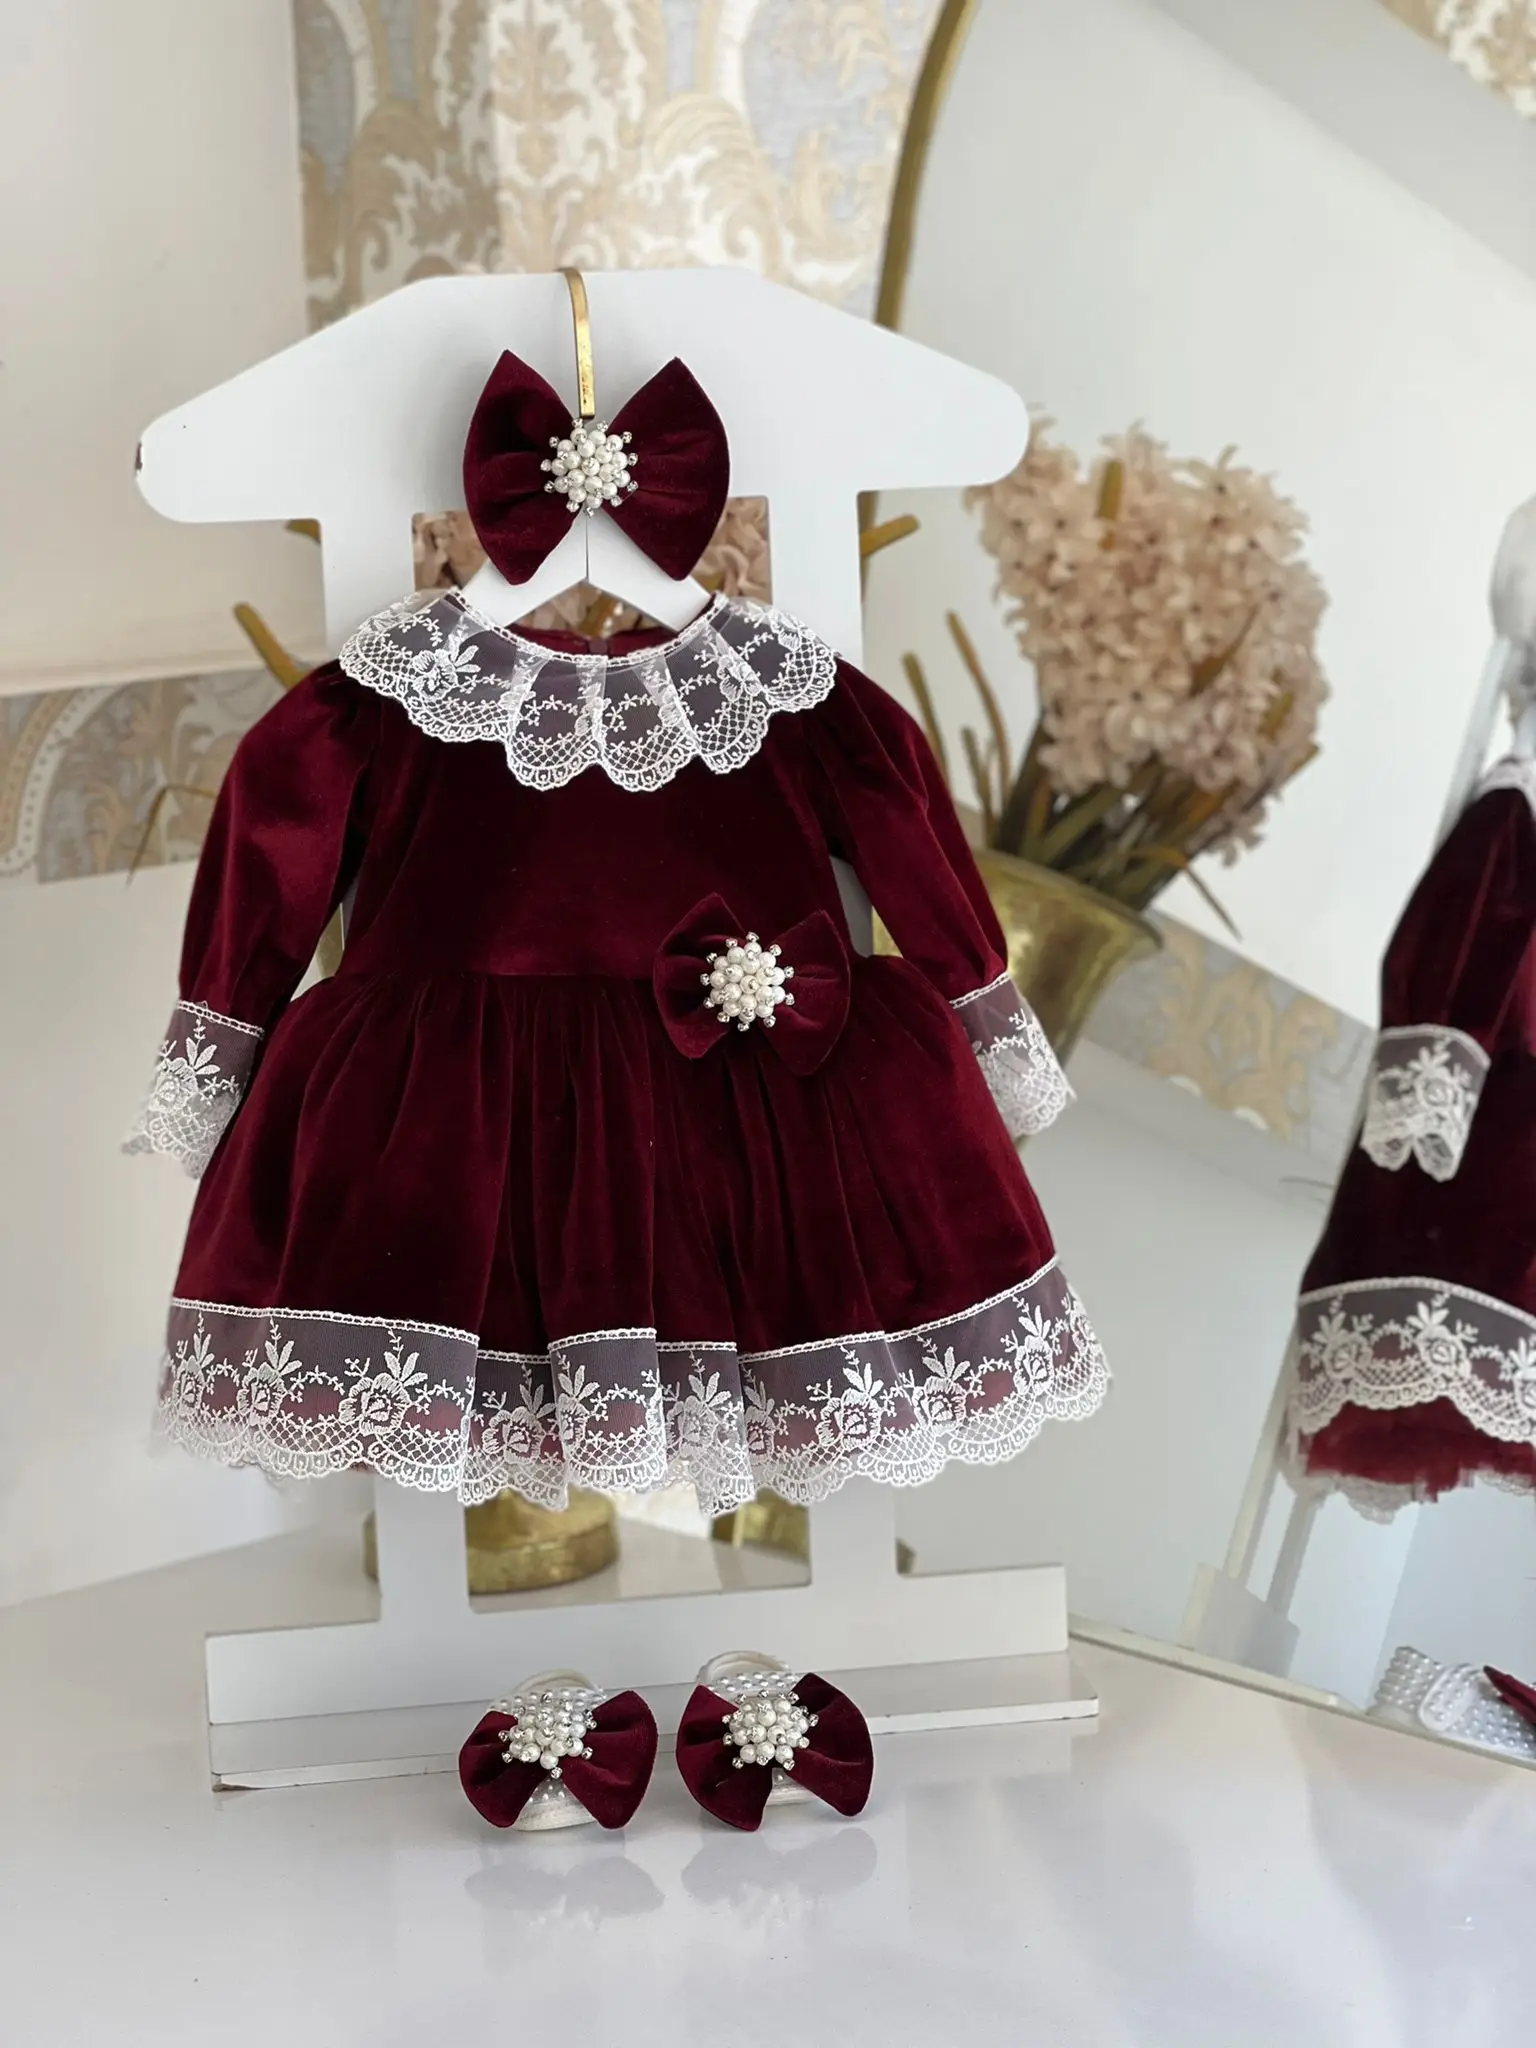 Girls Long Sleeve Special Planting Dresses Autumn/Winter Warm Birthday Party Ruffle Princess Costume Kids Red Christmas Disfraz